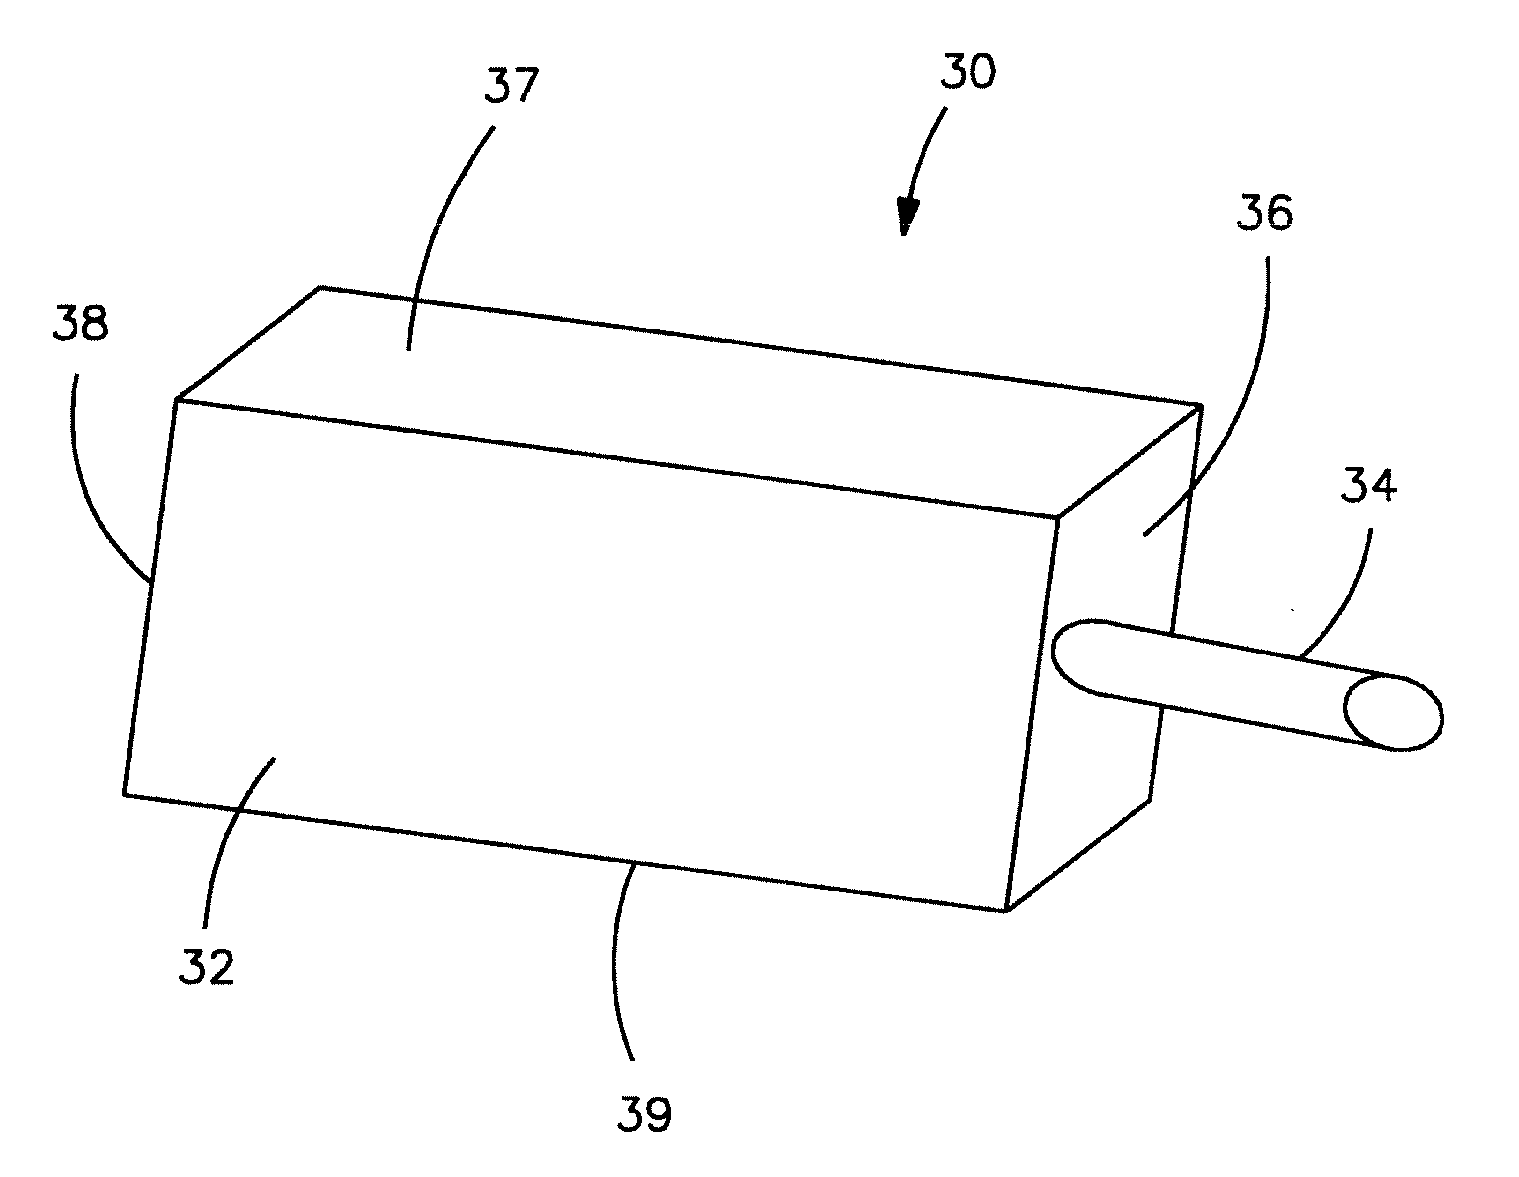 Electrolytic Capacitor Anode Treated with an Organometallic Compound